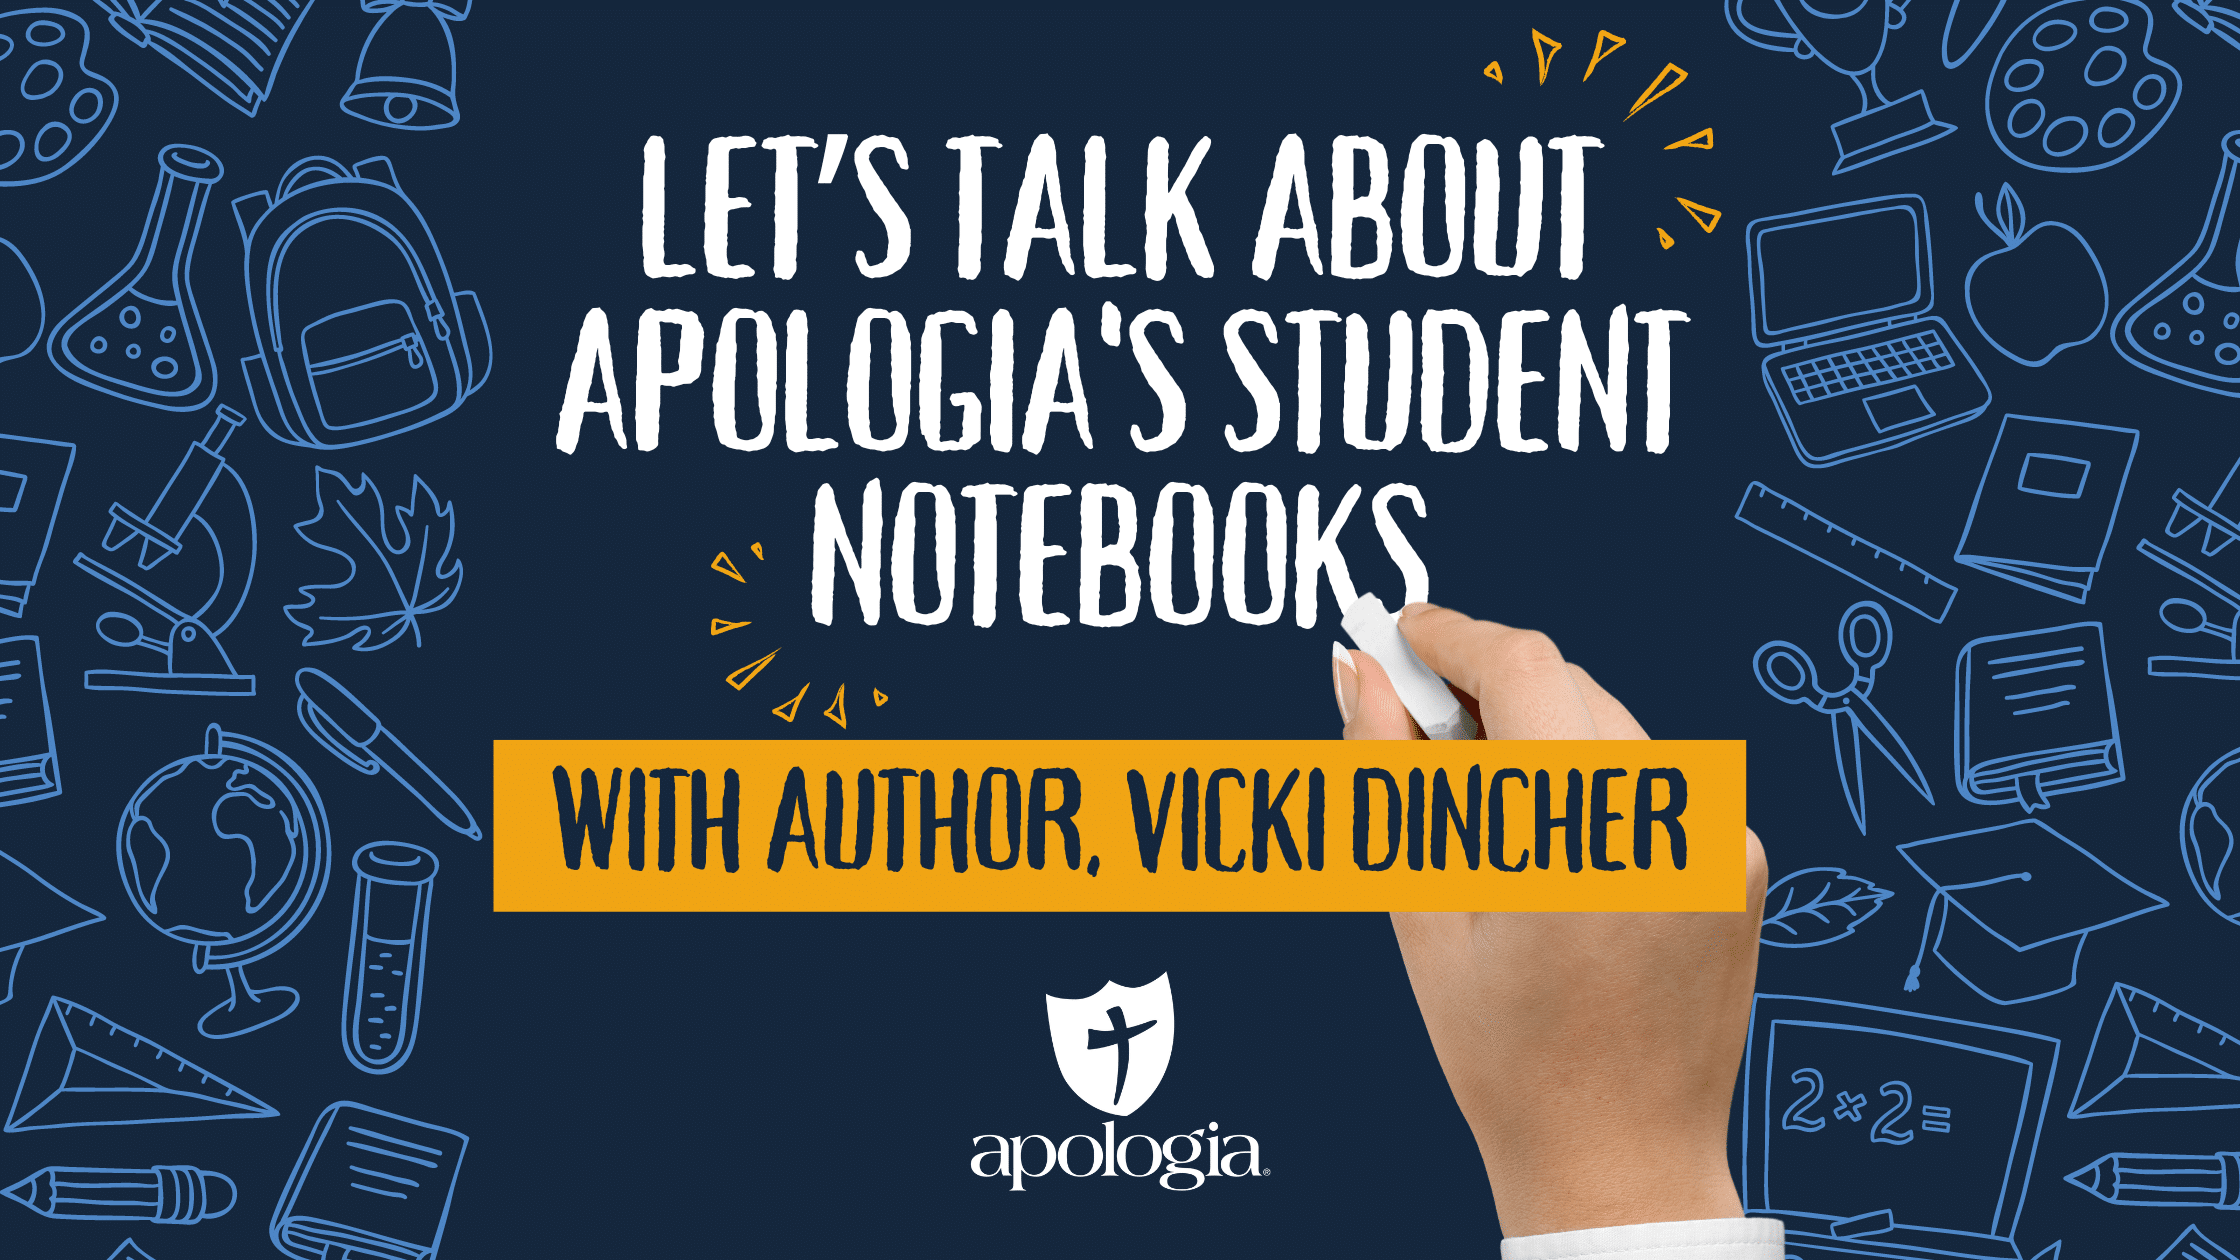 Let’s Talk About the Creation of the Apologia Student Notebooks